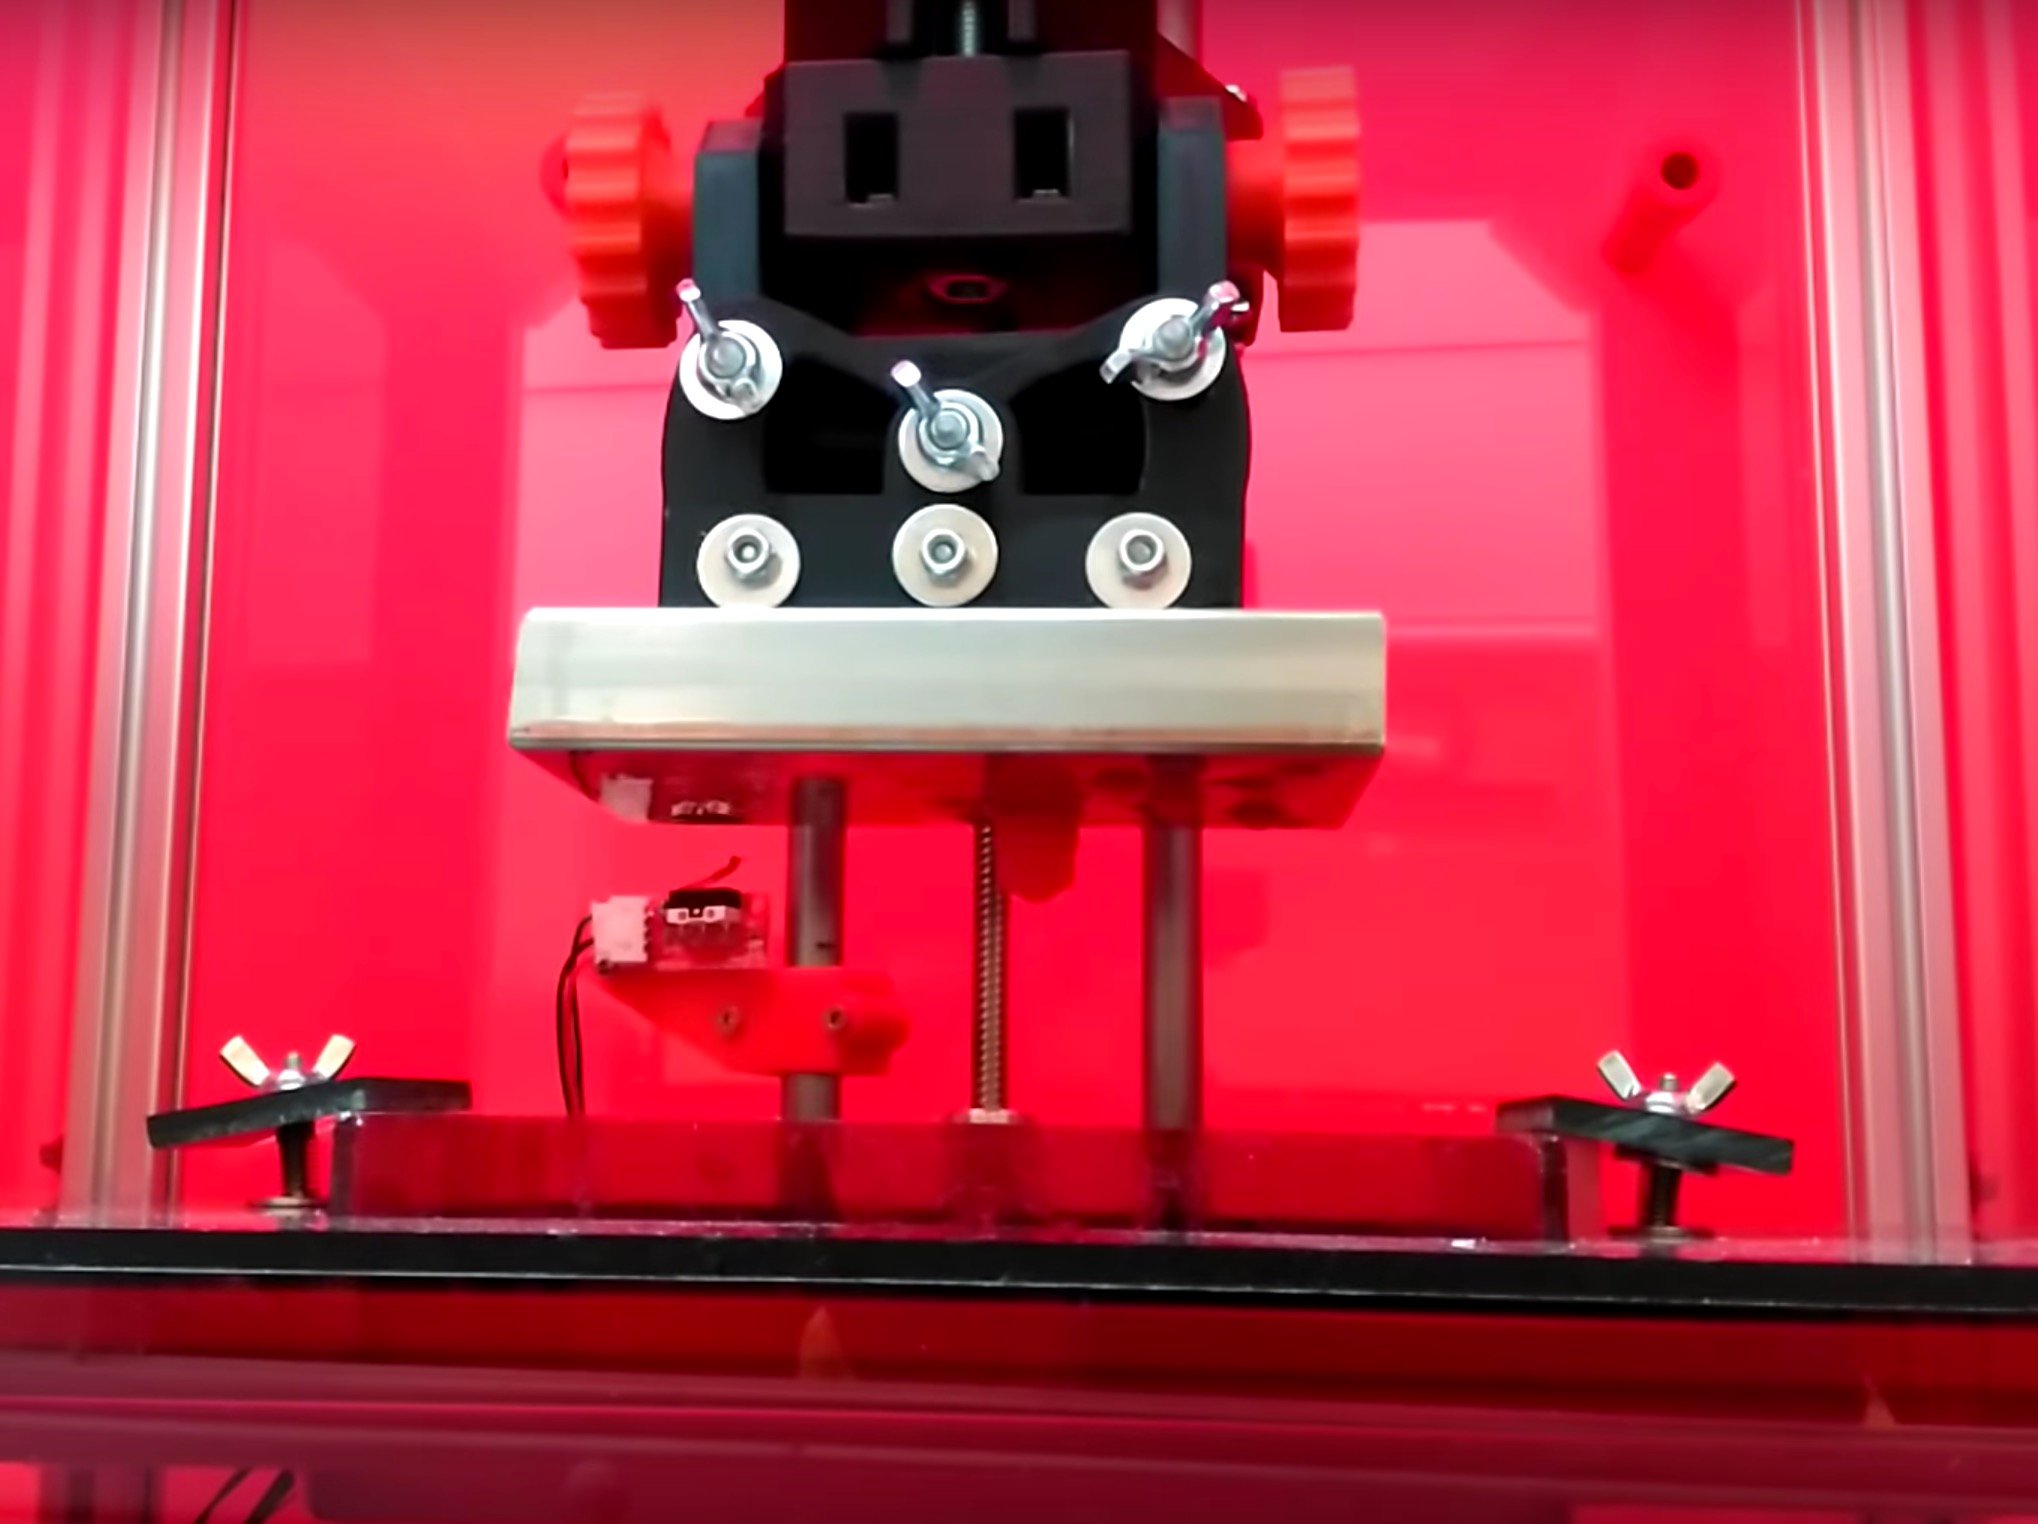  Inside the RooBee One open source 3D printer 